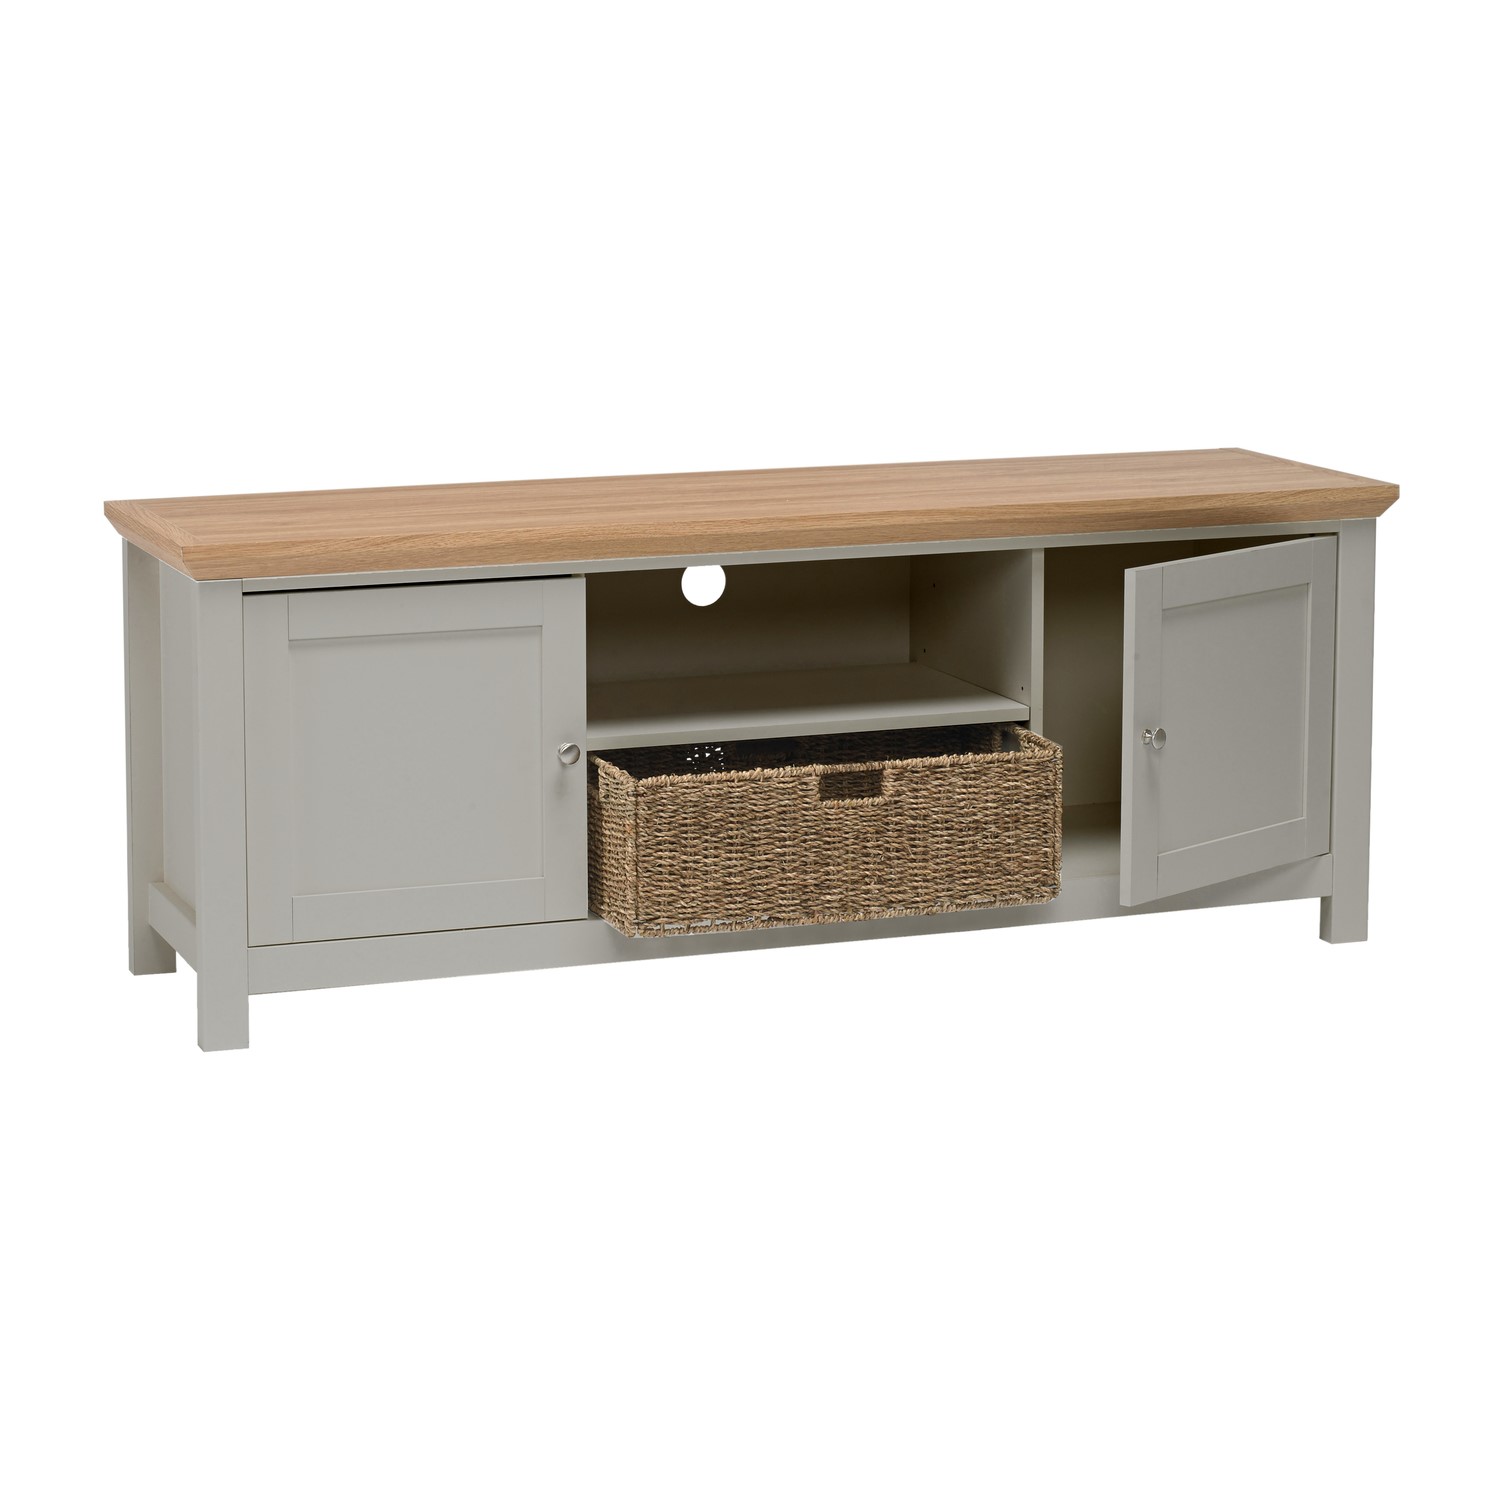 Read more about Large tv stand with storage in grey tvs up to 50 cotswold